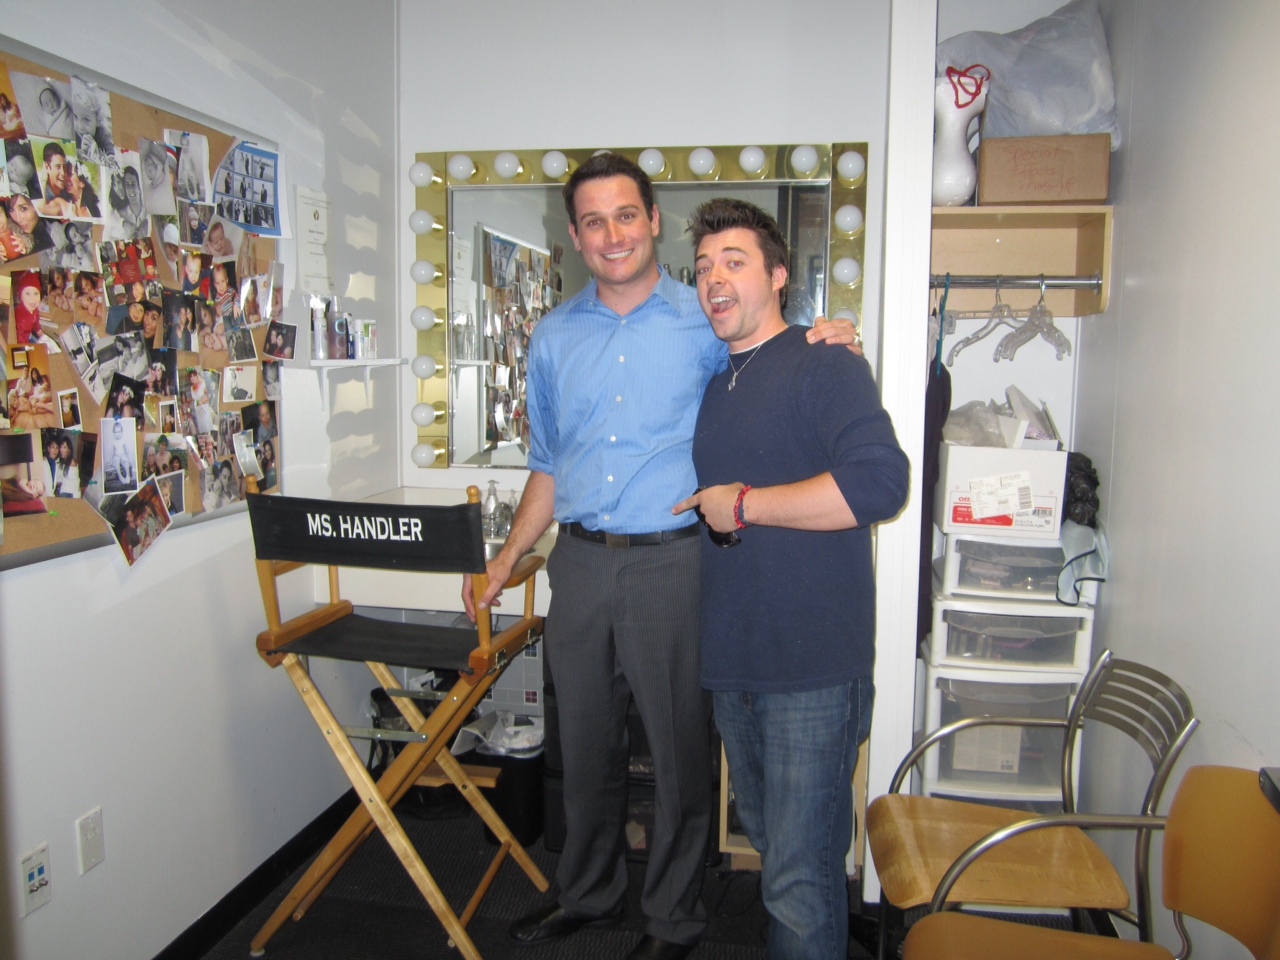 Solly Hemus and Matthew Smith backstage at Chelsea Lately.